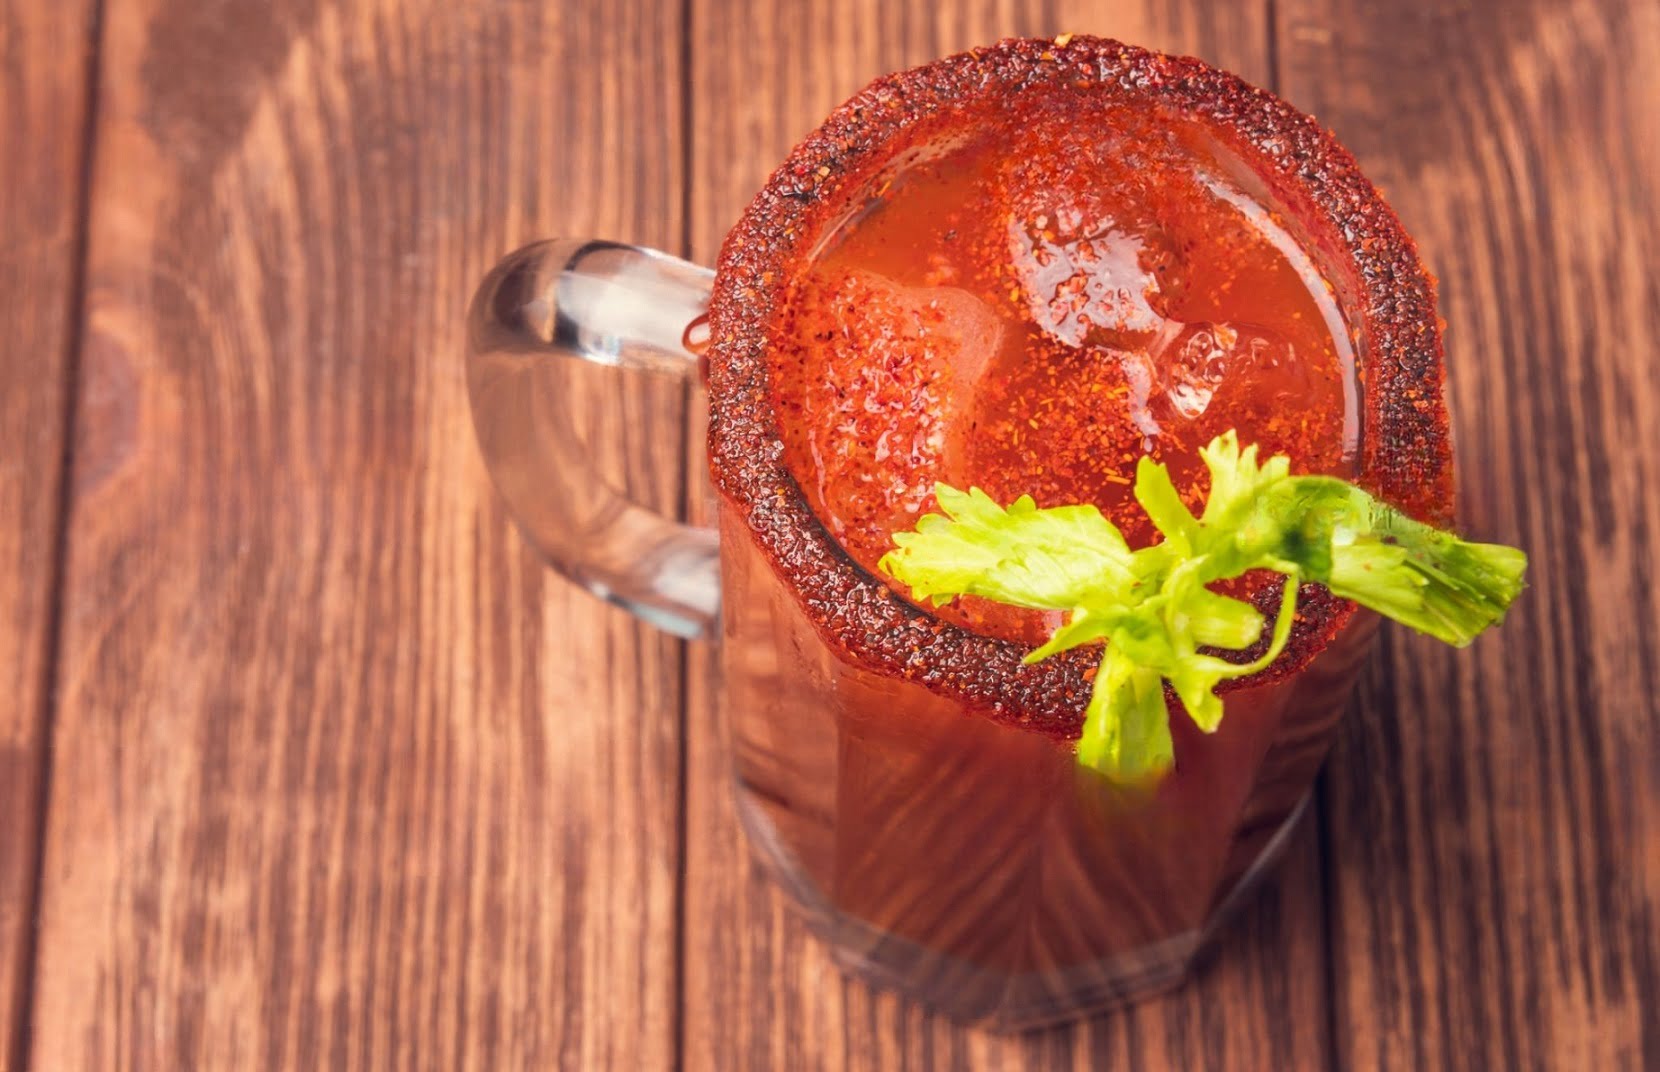 How To Make A Perfect Michelada Beer How To Make A Perfect Michelada Beer?